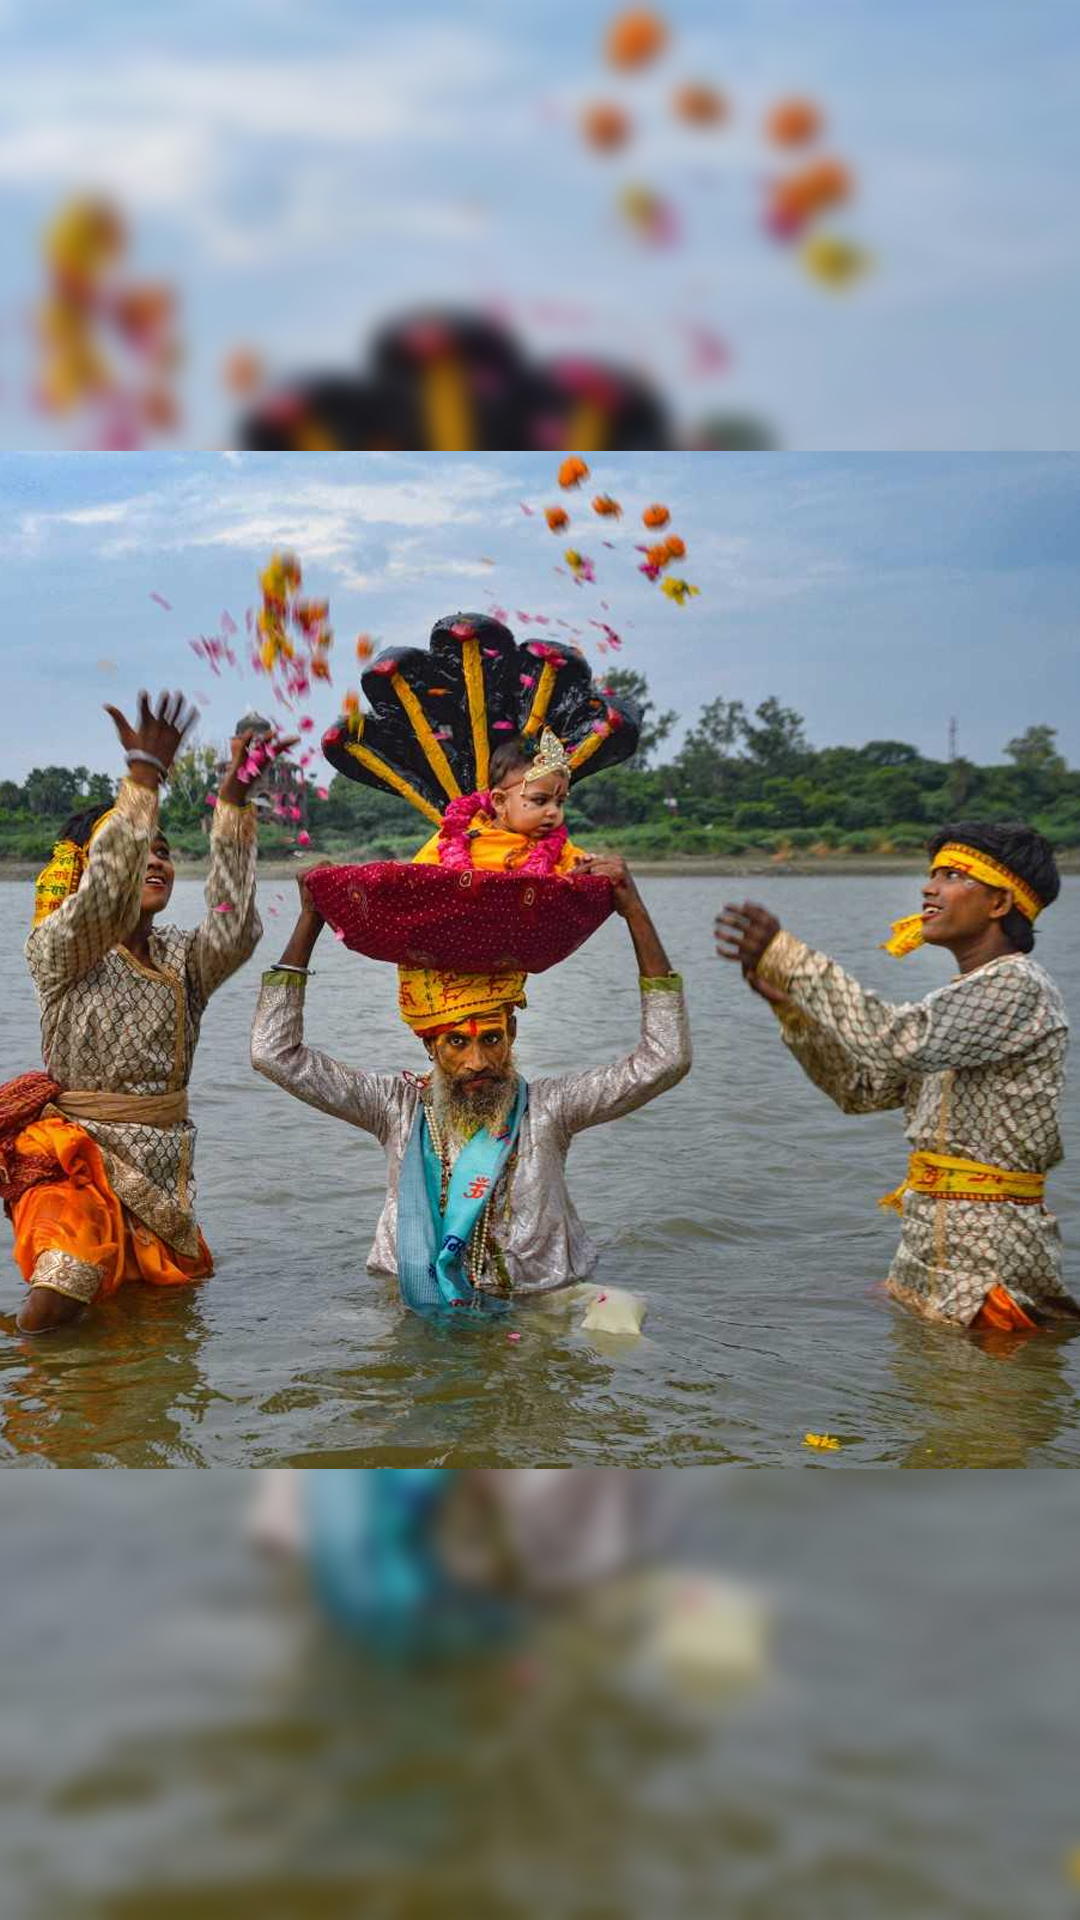 Devotees perform ritual as they take out tableau representing Lord Krishna's birth story in River Yamuna